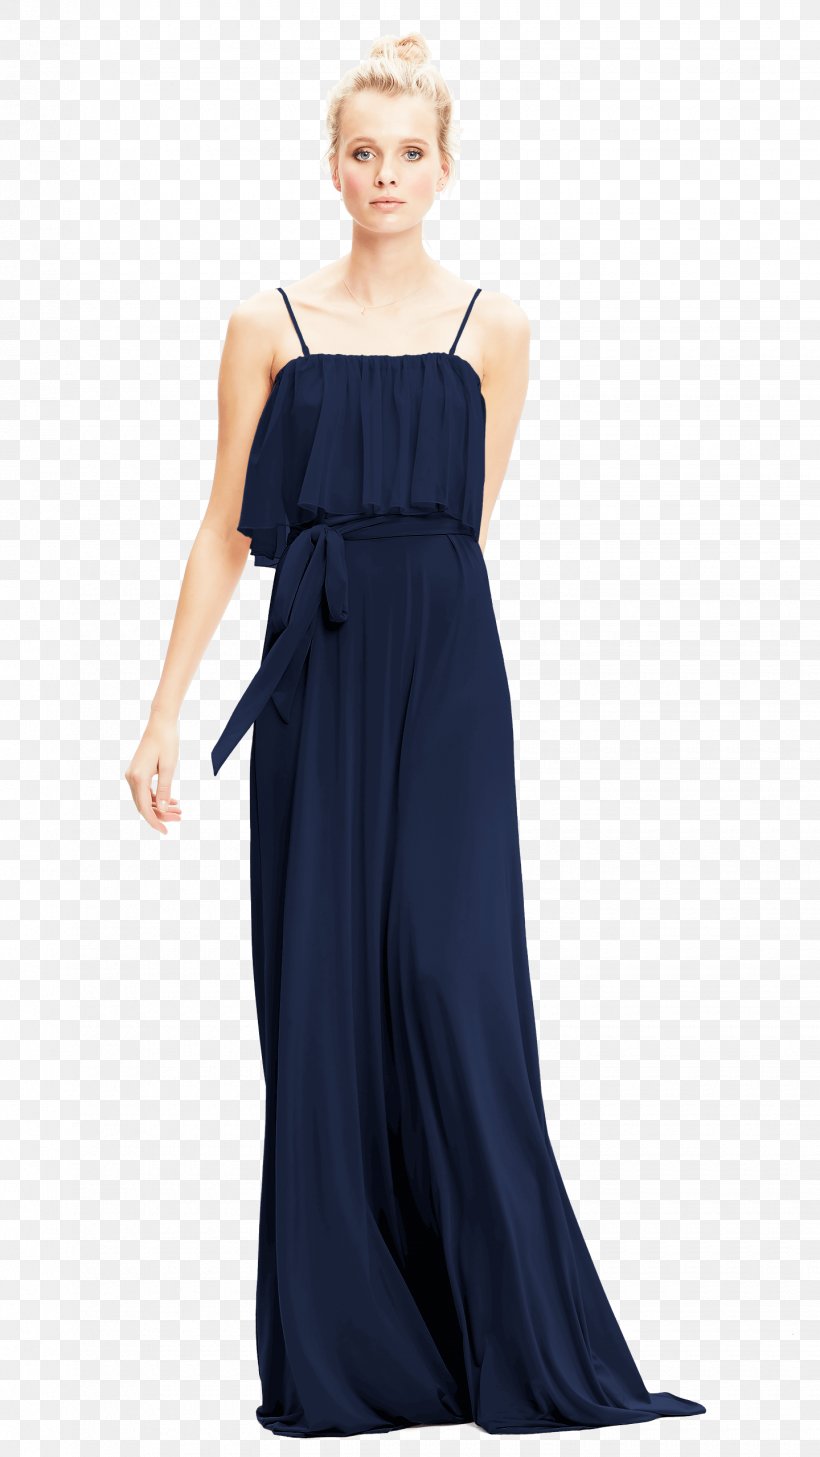 Cocktail Dress Clothing Bridesmaid Navy Blue, PNG, 1440x2560px, Dress, Blue, Bridal Party Dress, Bride, Bridesmaid Download Free